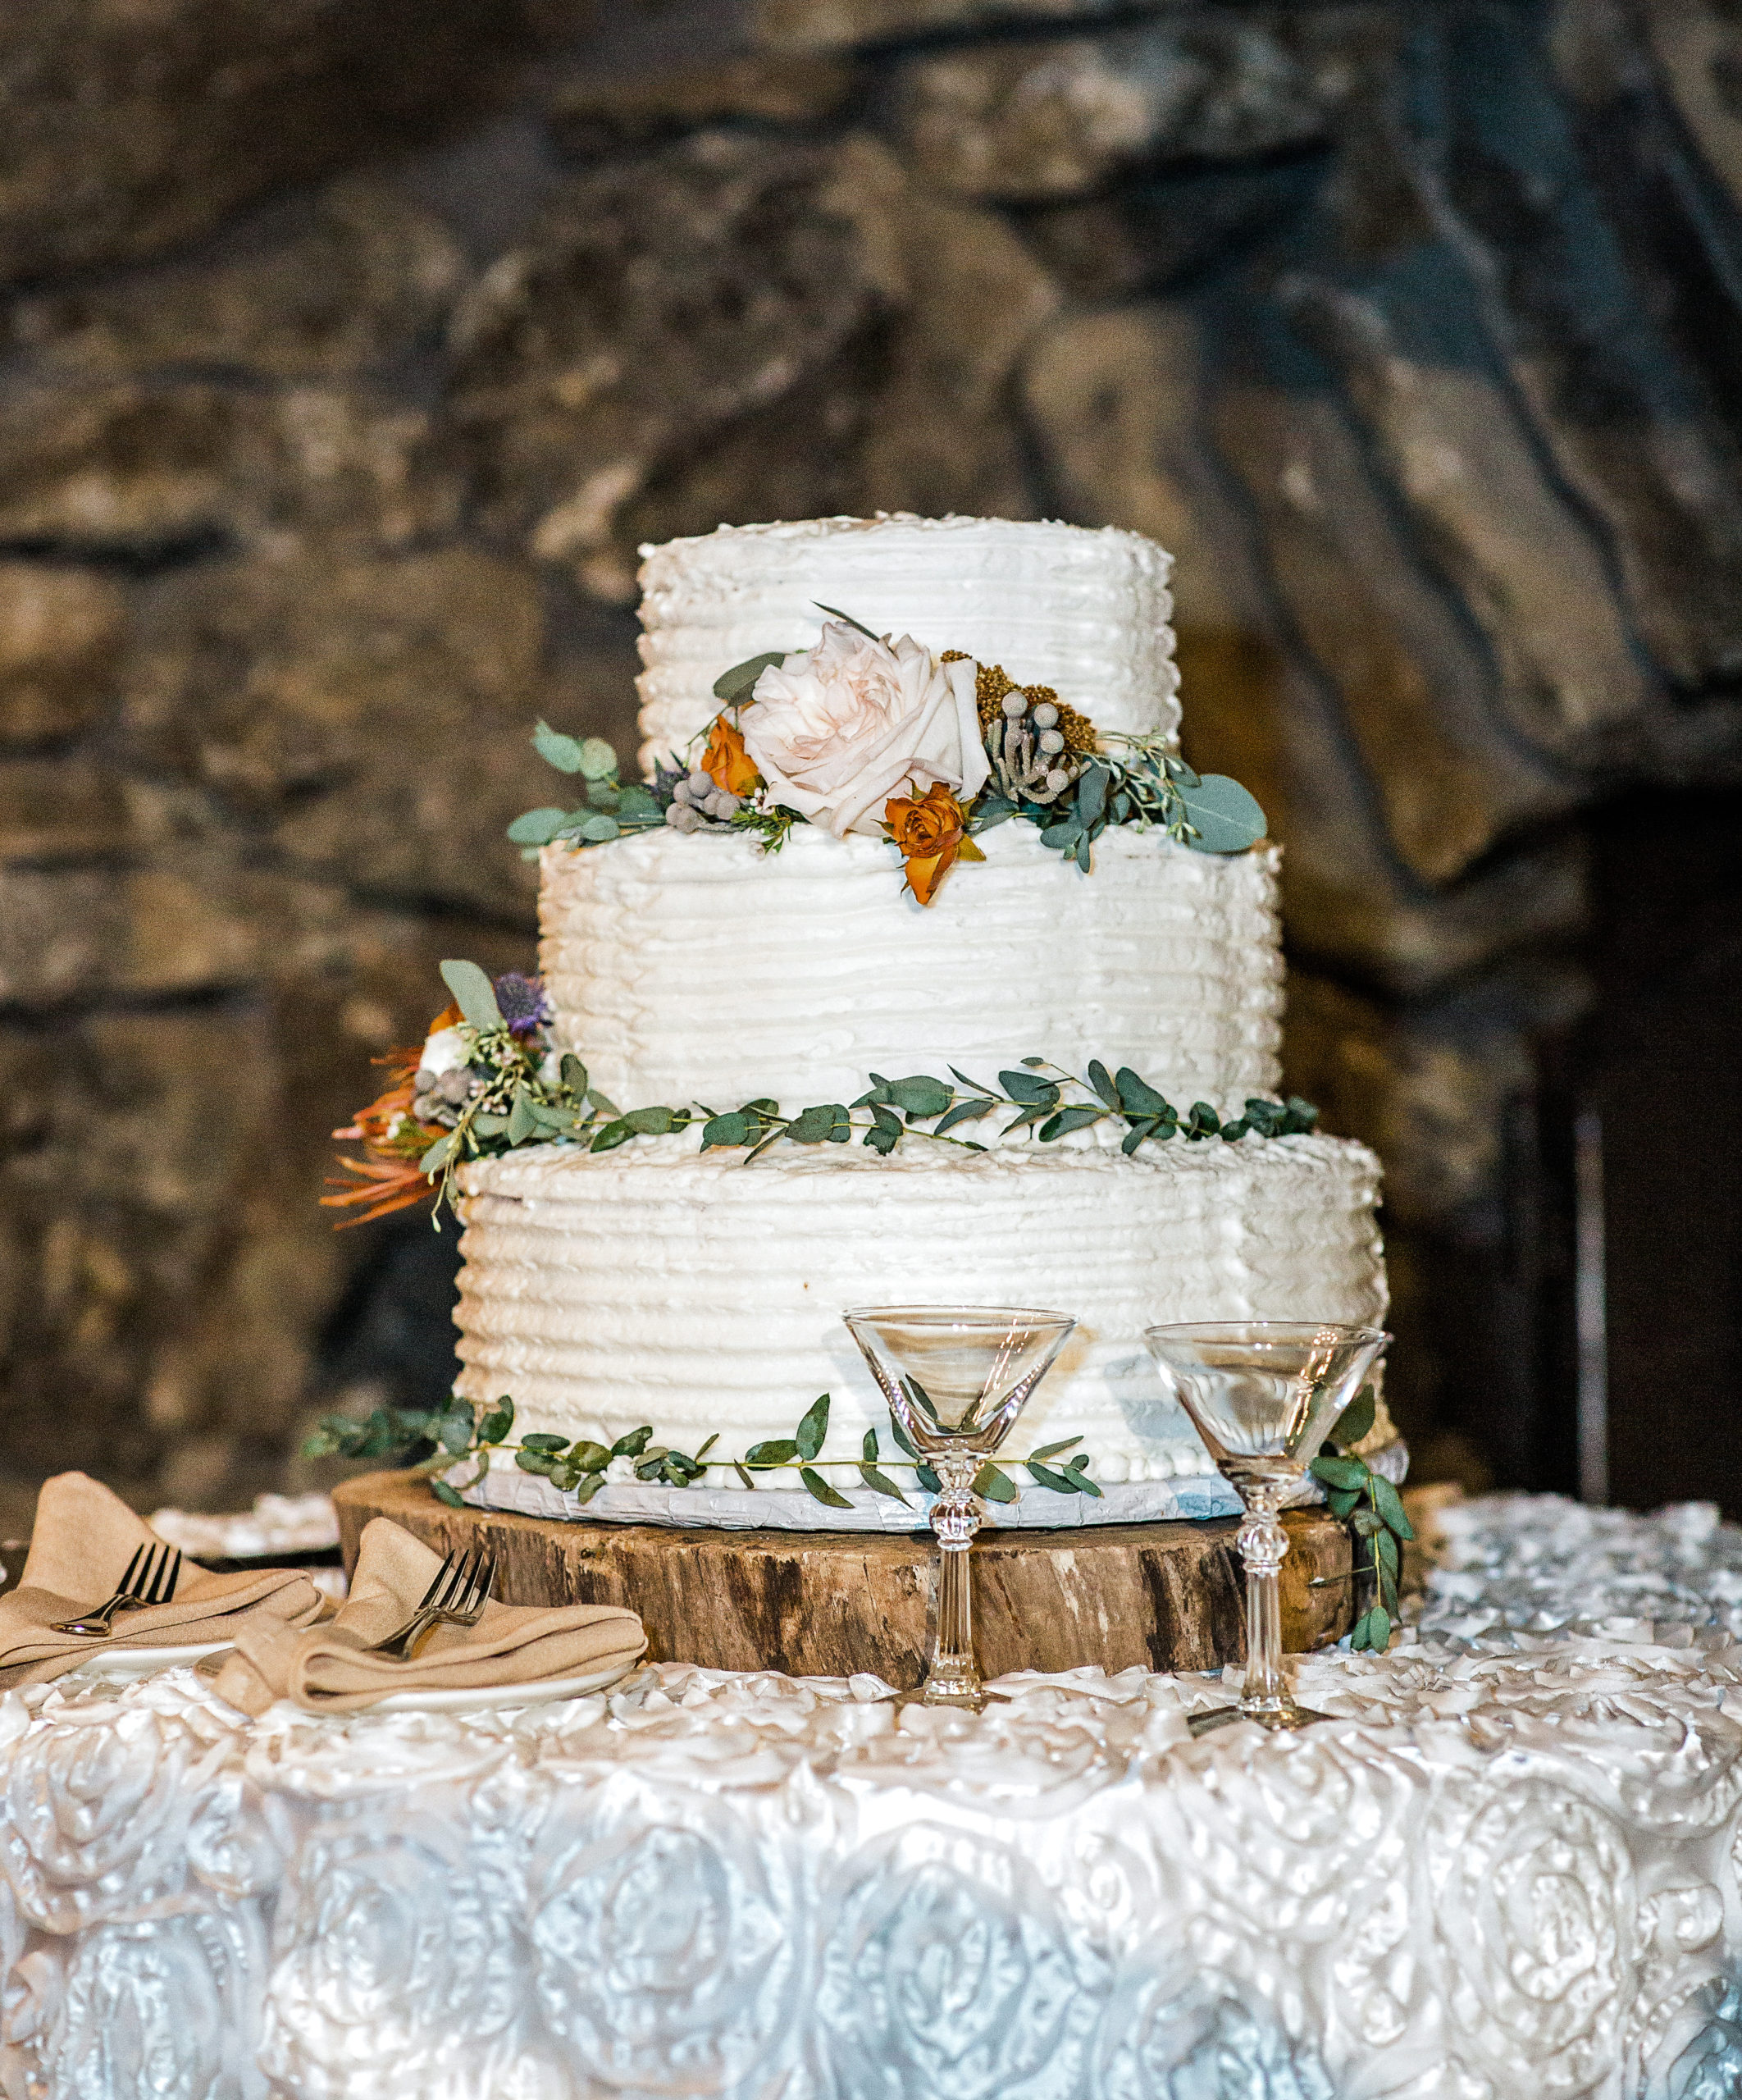 Wedding Cake at Annie's Barn at Top of the rock reception venue